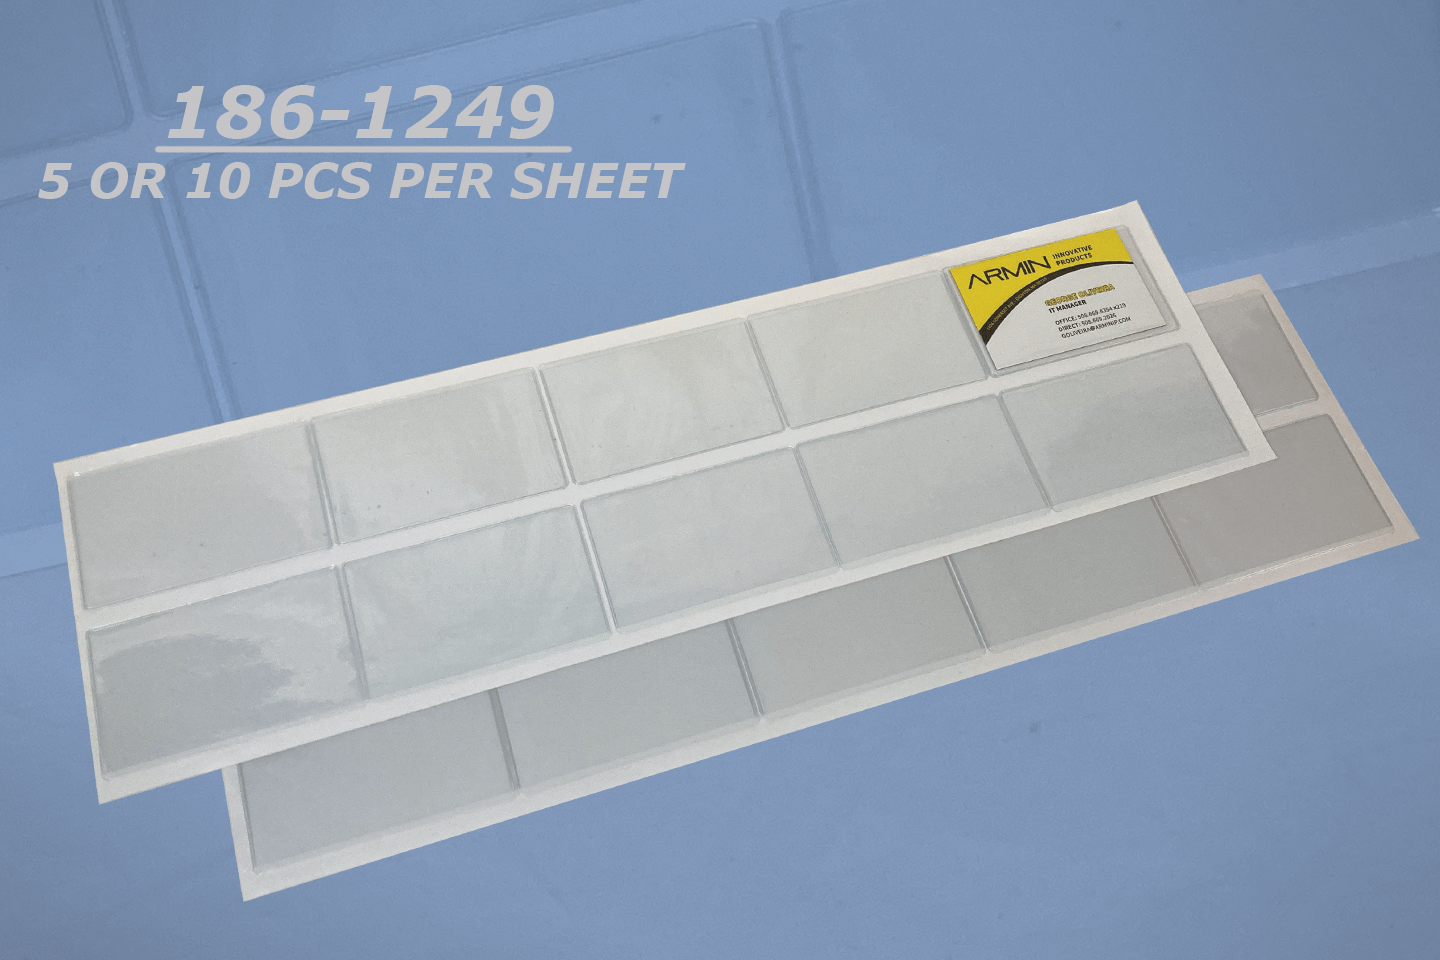 3 3/4" x 2 3/8" press-on adhesive pouch open top (long side)